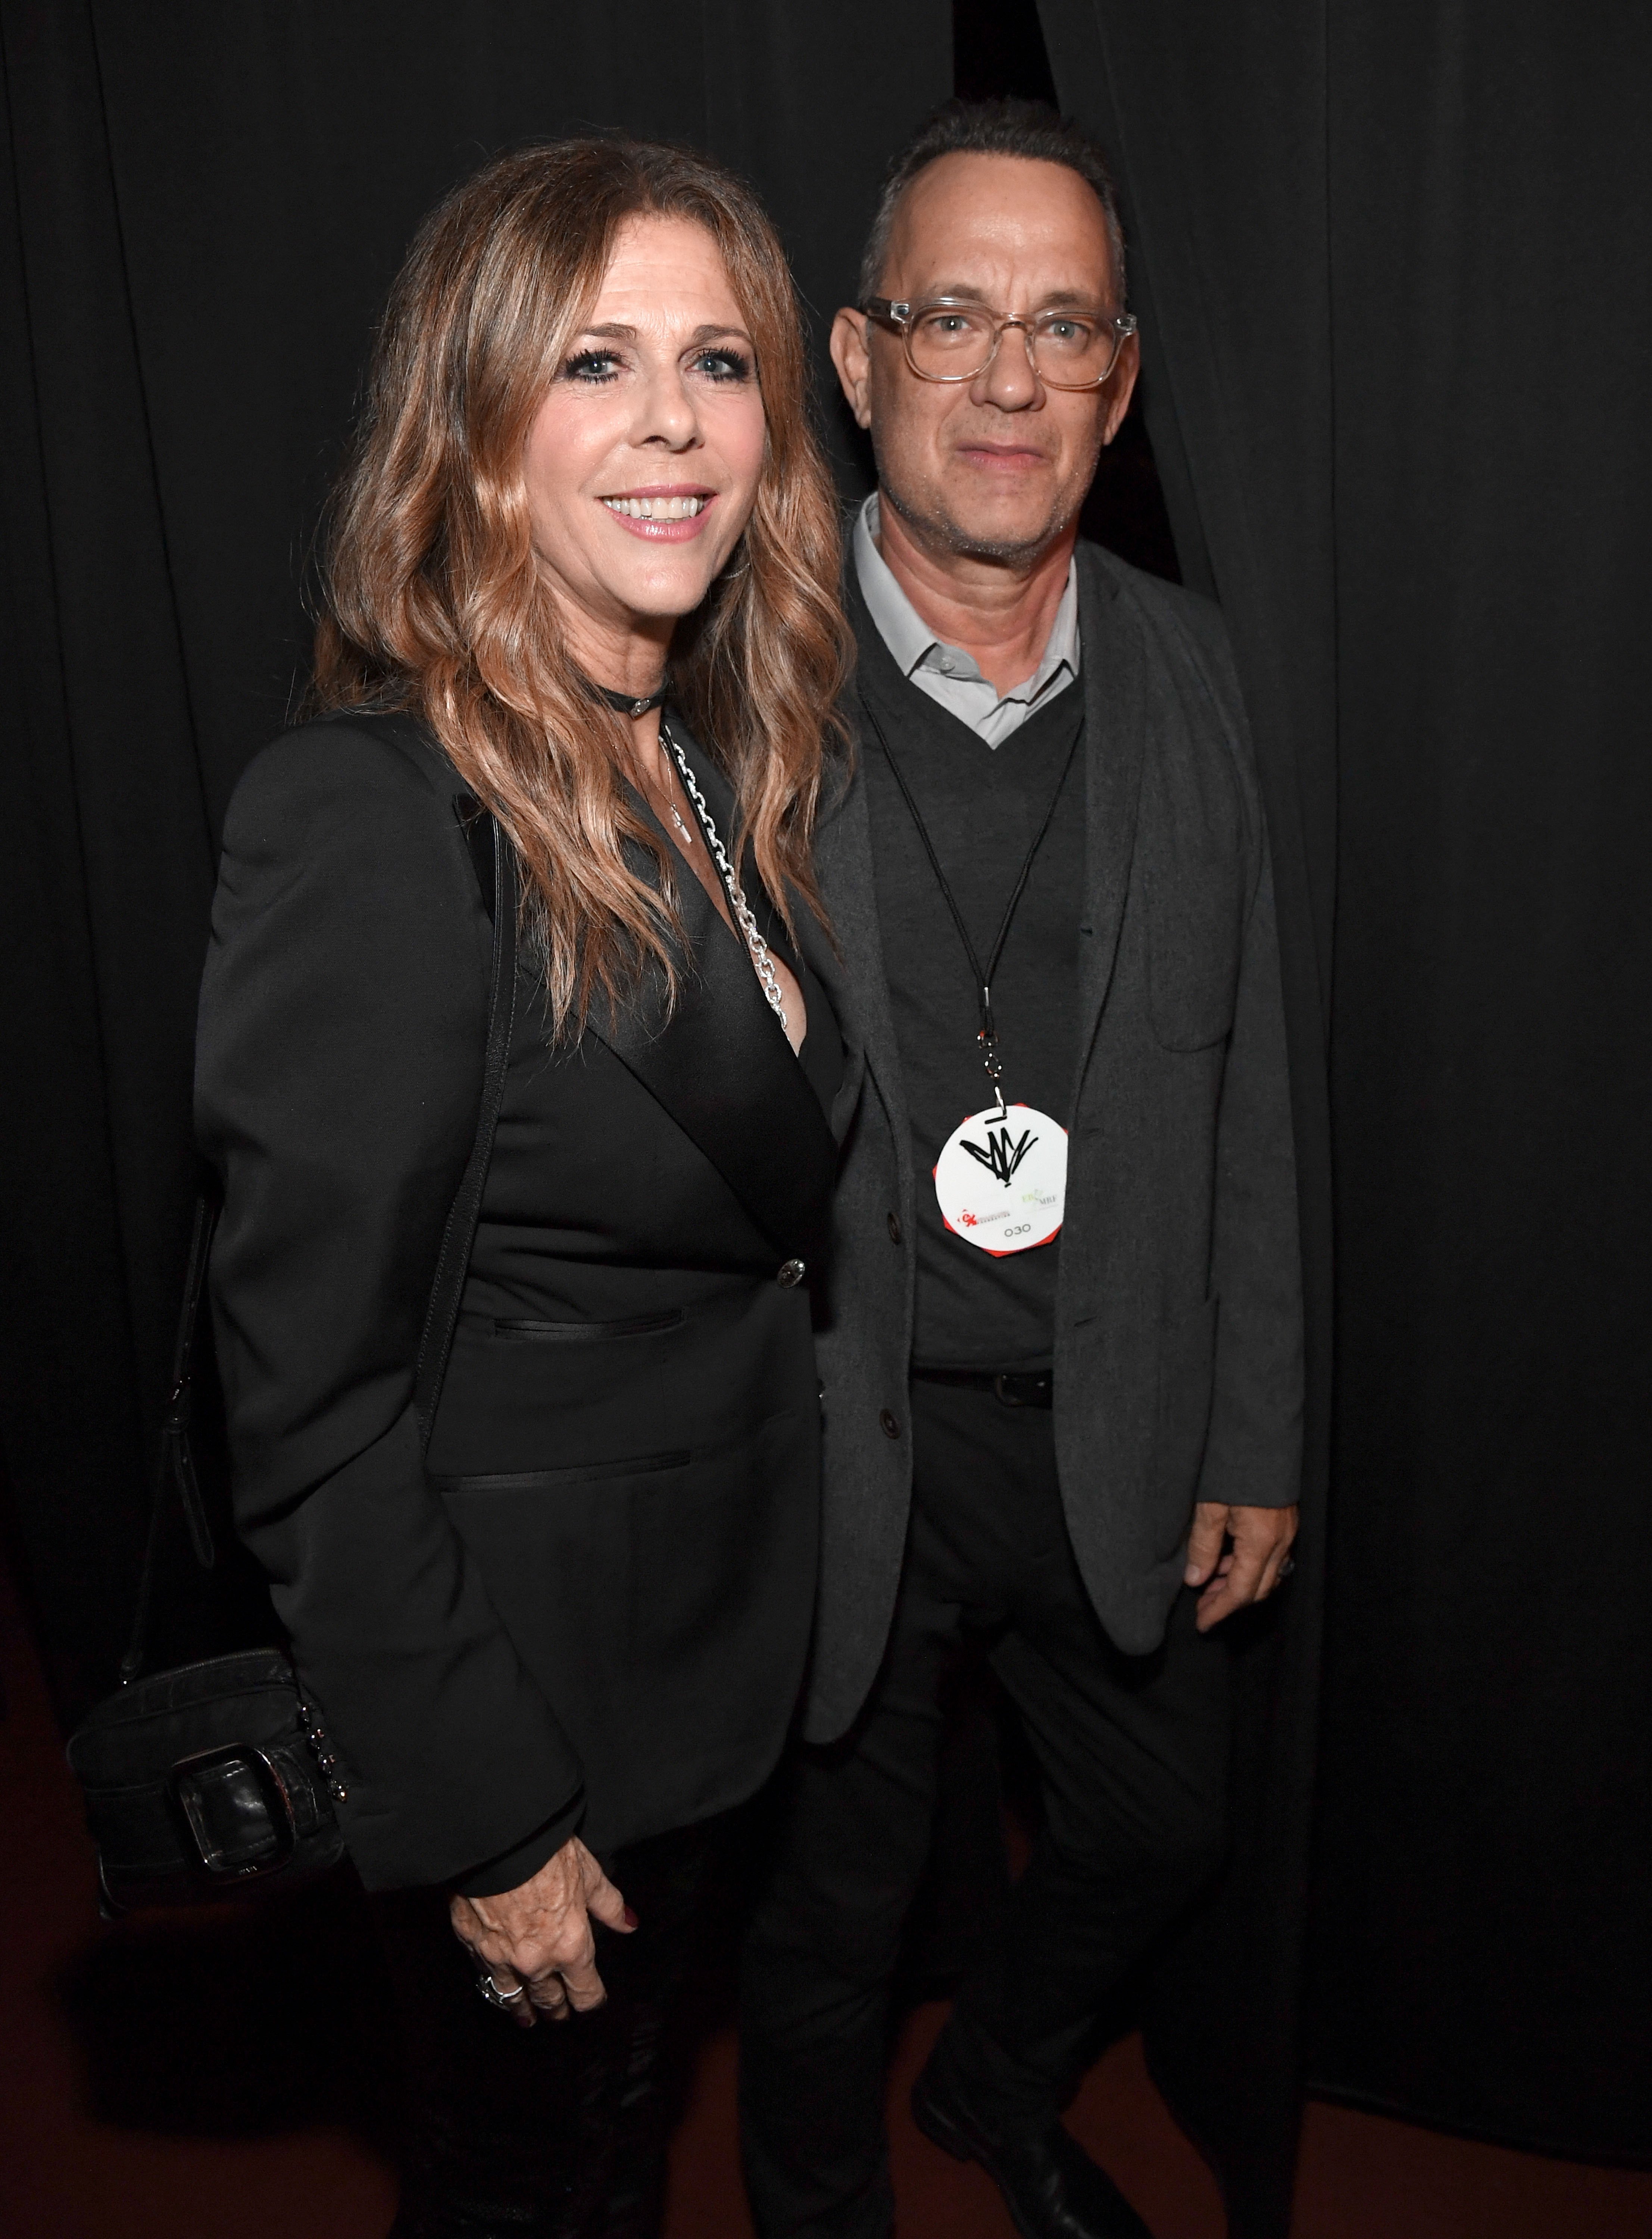 Tom Hanks and Rita Wilson attend the I Am the Highway: A Tribute to Chris Cornell tour in Inglewood, California on January 16, 2019 | Photo: Getty Images